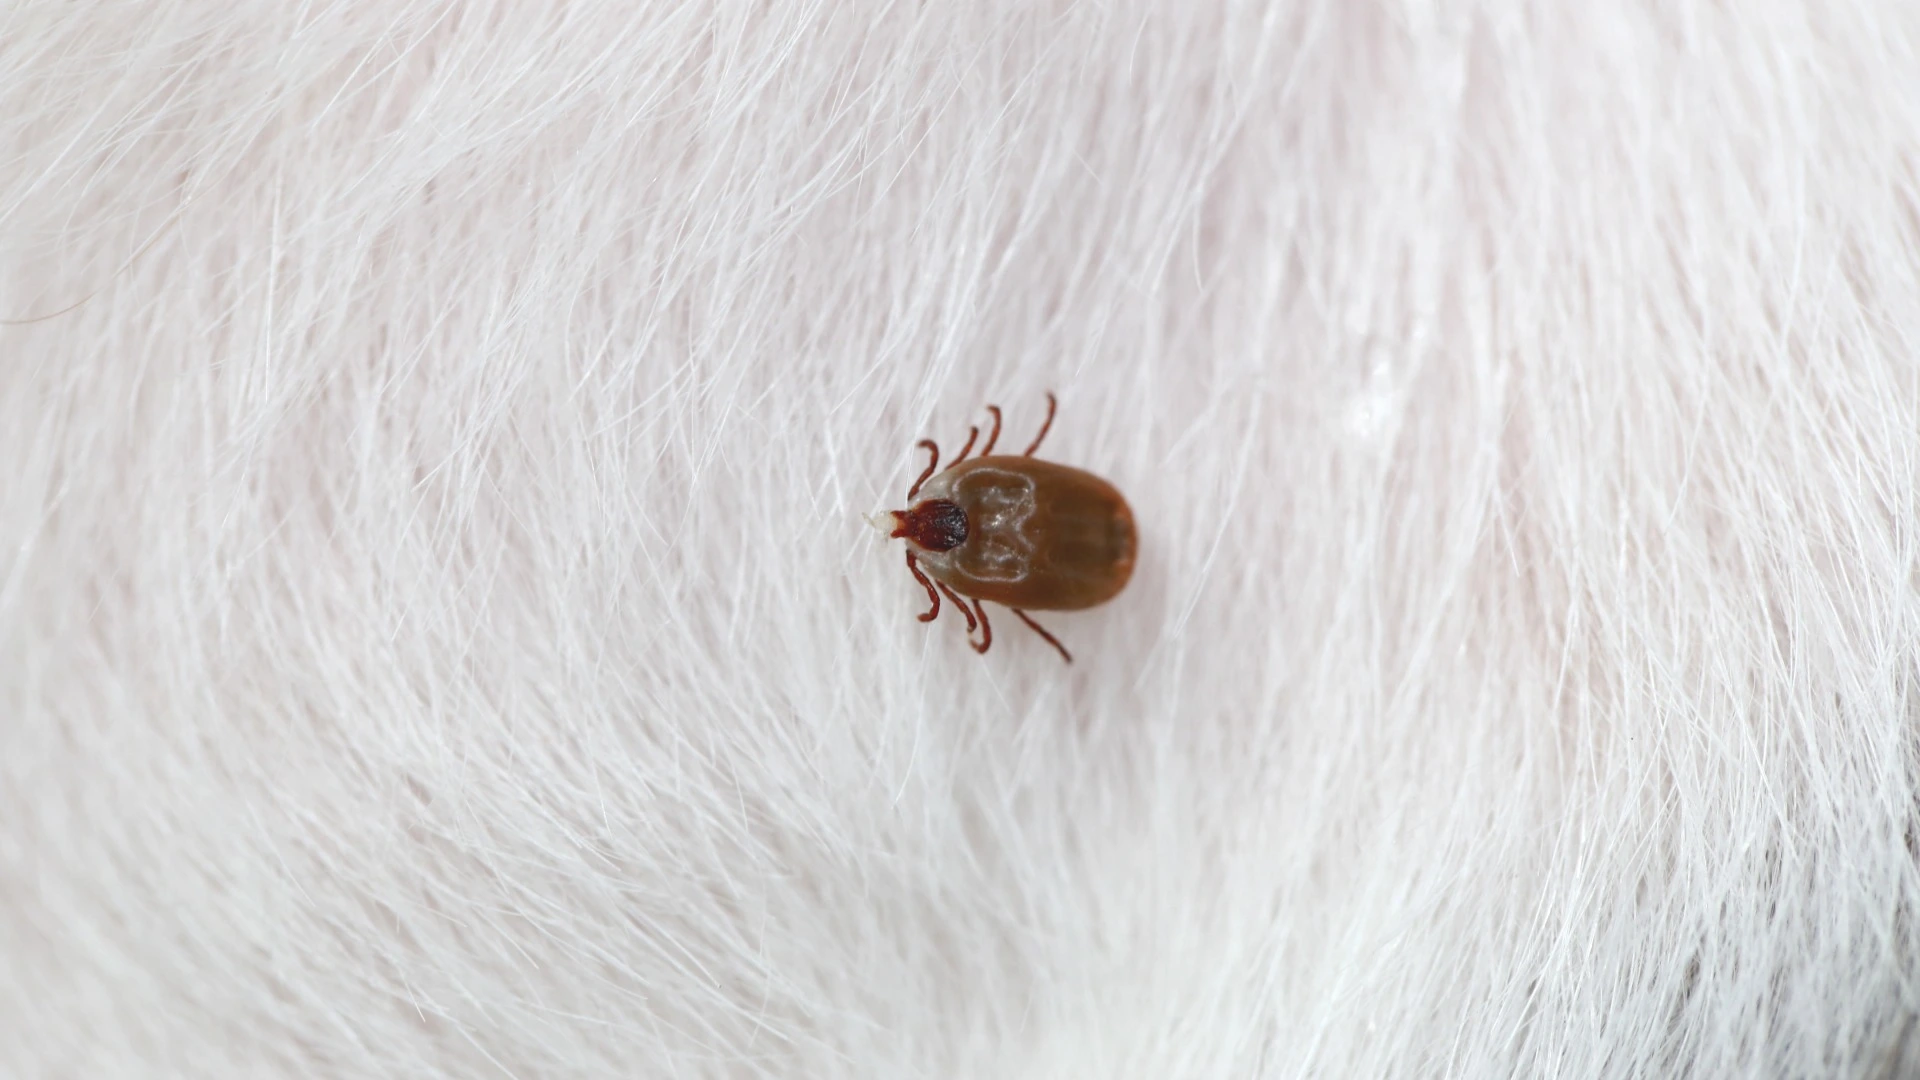 Tick found on homeowner's pet in Urbandale, IA.